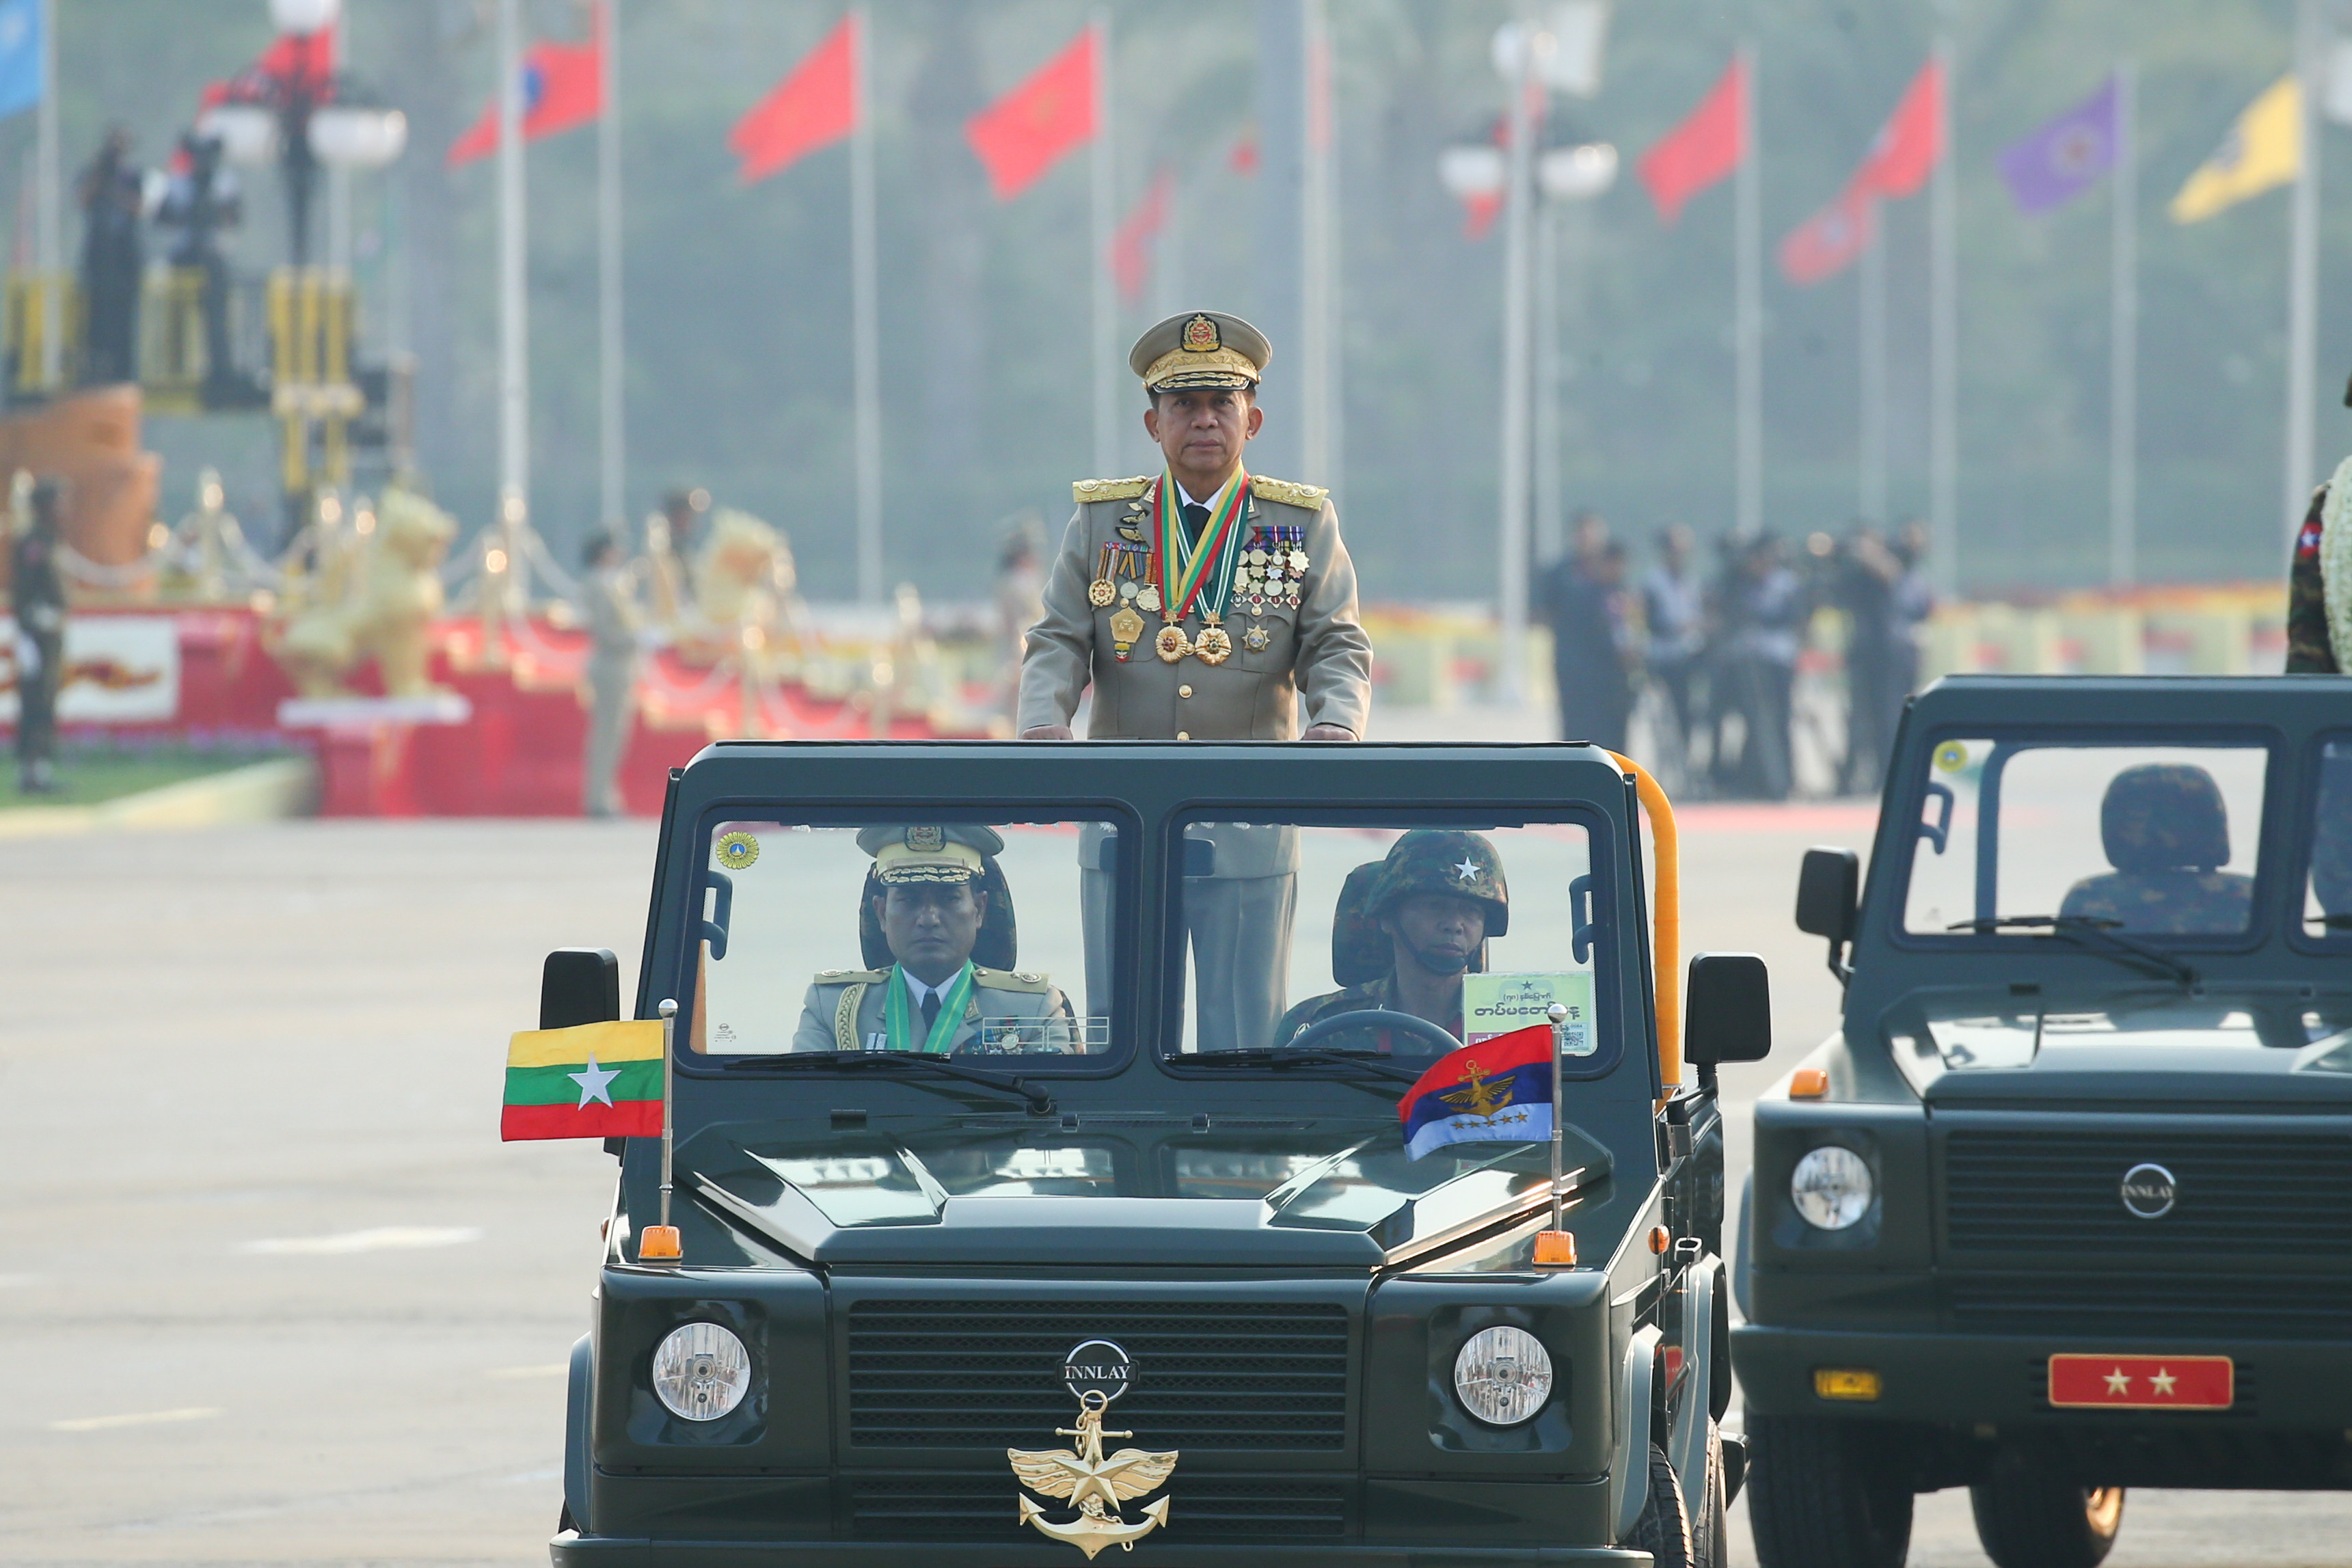 Myanmar’s General Min Aung Hlaing, head of the nation’s junta, which seized power in a bloody 2021 coup, attends a military parade in March. Photo: Xinhua